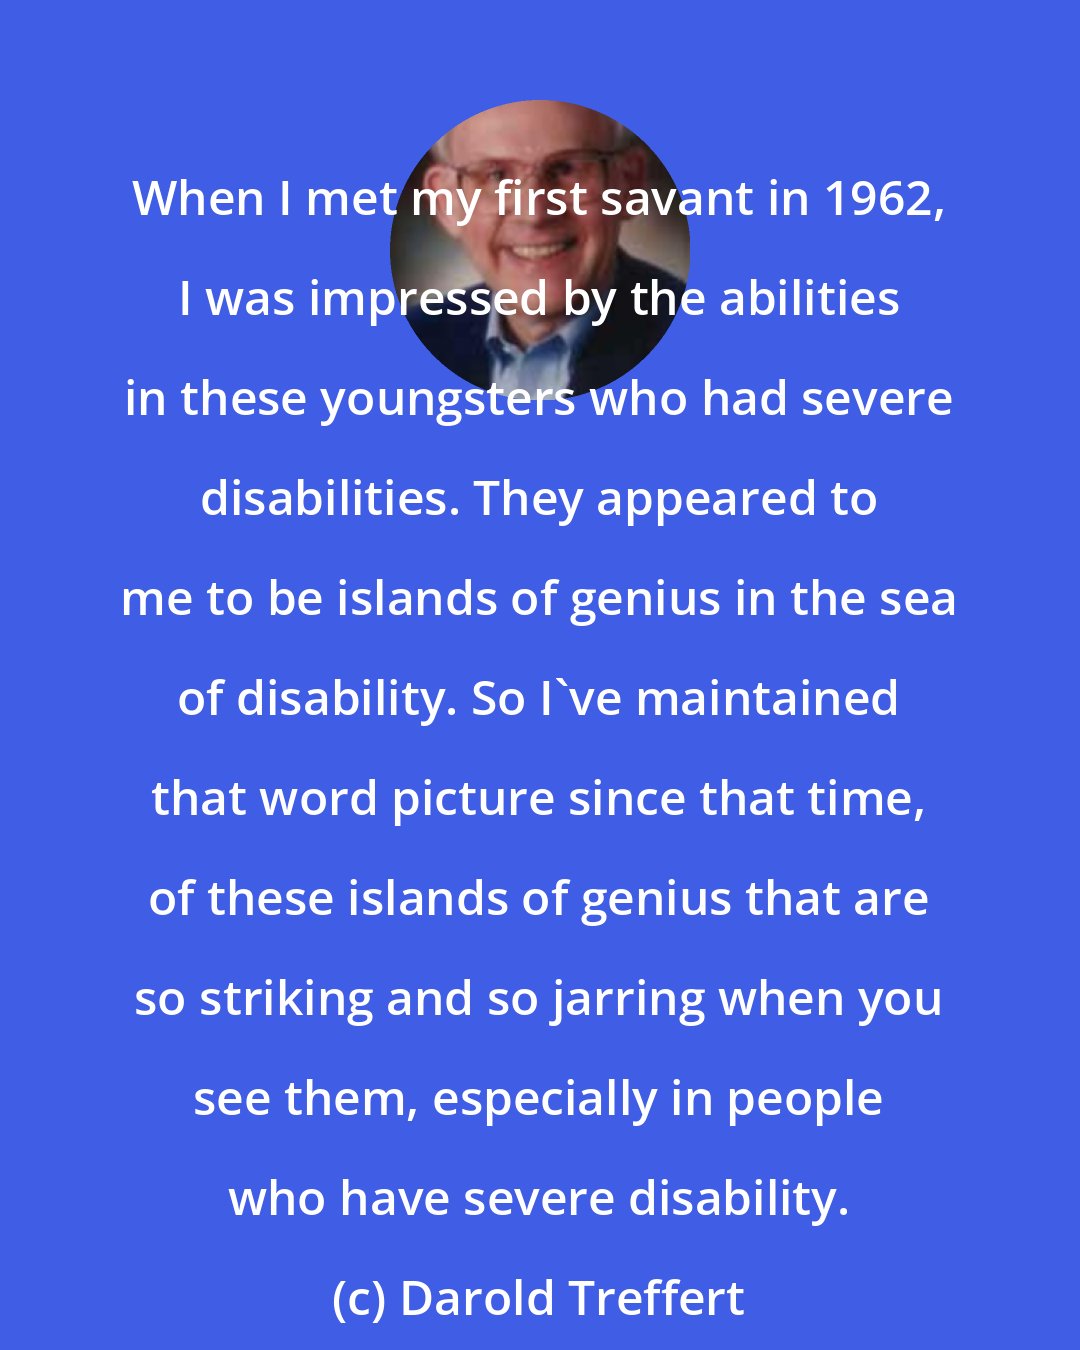 Darold Treffert: When I met my first savant in 1962, I was impressed by the abilities in these youngsters who had severe disabilities. They appeared to me to be islands of genius in the sea of disability. So I've maintained that word picture since that time, of these islands of genius that are so striking and so jarring when you see them, especially in people who have severe disability.